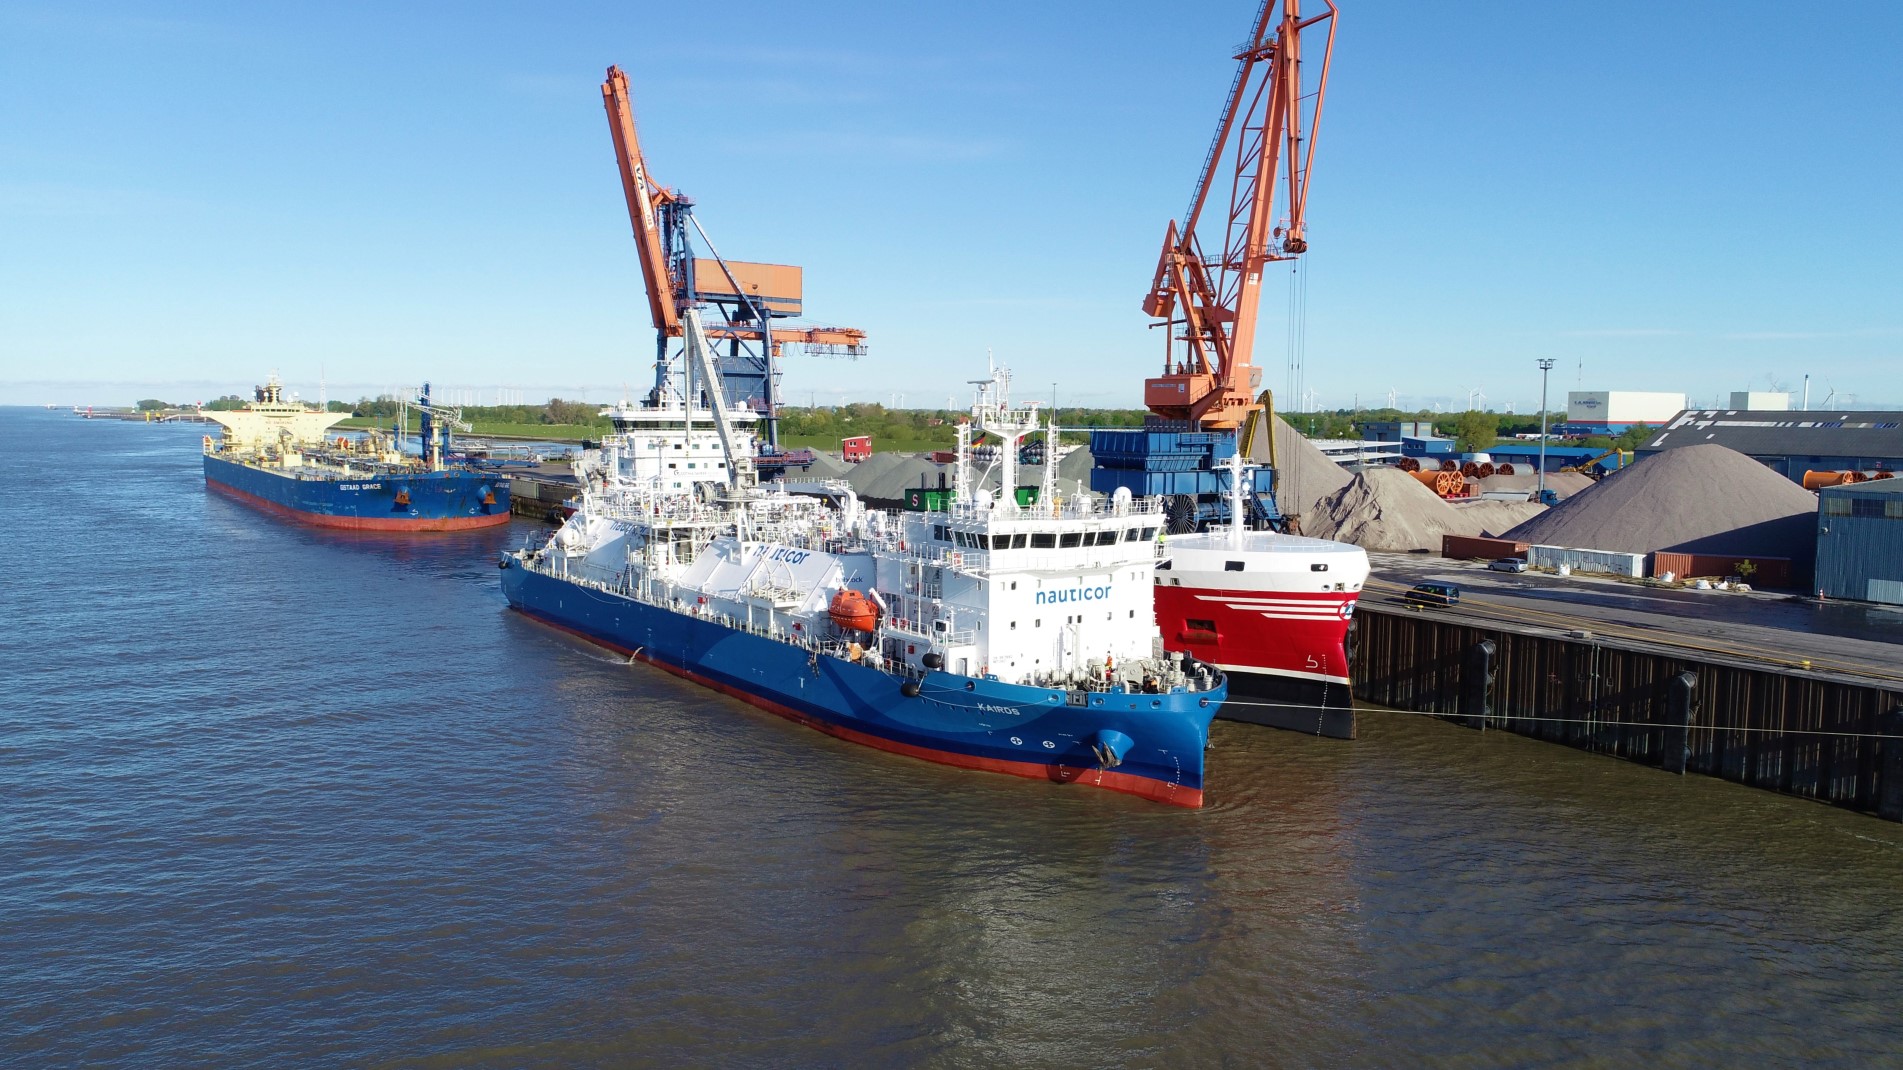 Gasum’s subsidiary Nauticor conducts first ship-to-ship LNG bunkering operation for a product tanker in Germany